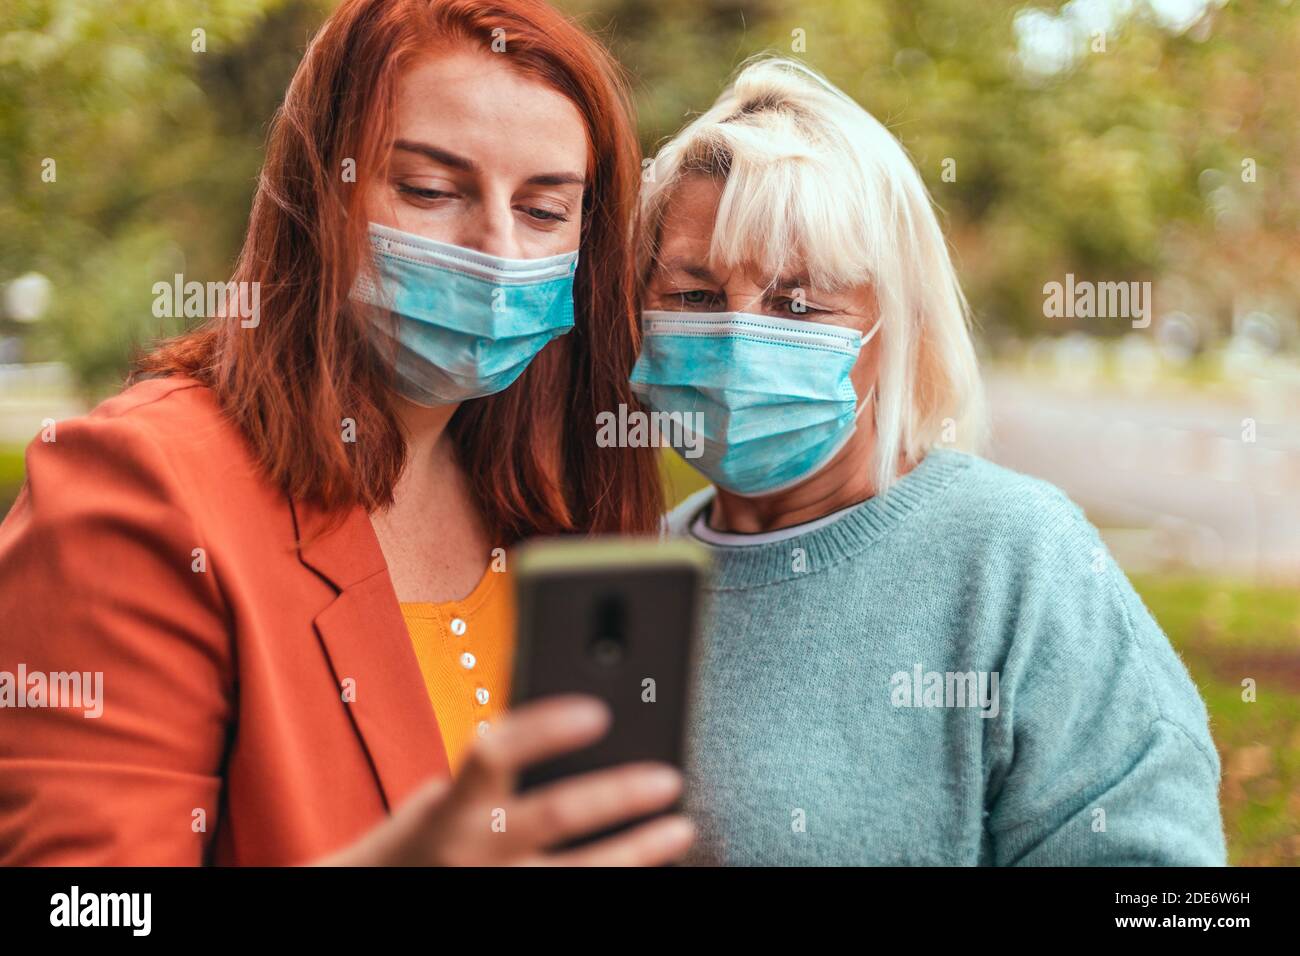 Coronavirus, Covid 19. Girl and adult woman in mask use smartphone app on city street. People watching video on the street in the park Stock Photo